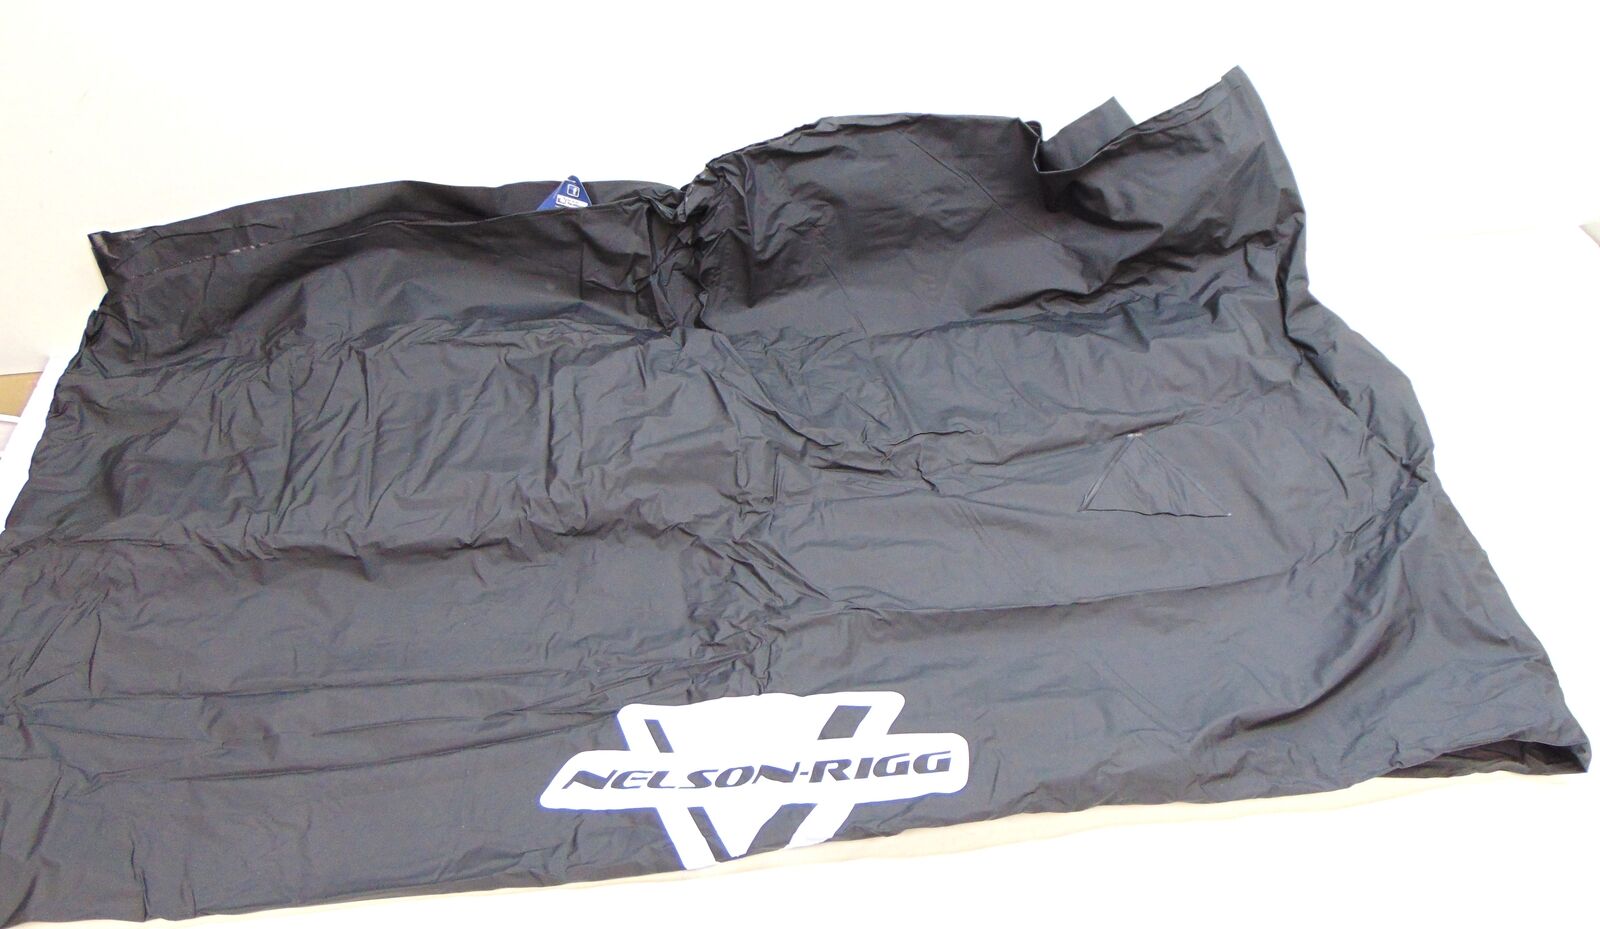 Nelson-Rigg MC-900 Econo Motorcycle Cover Graphite Black Large